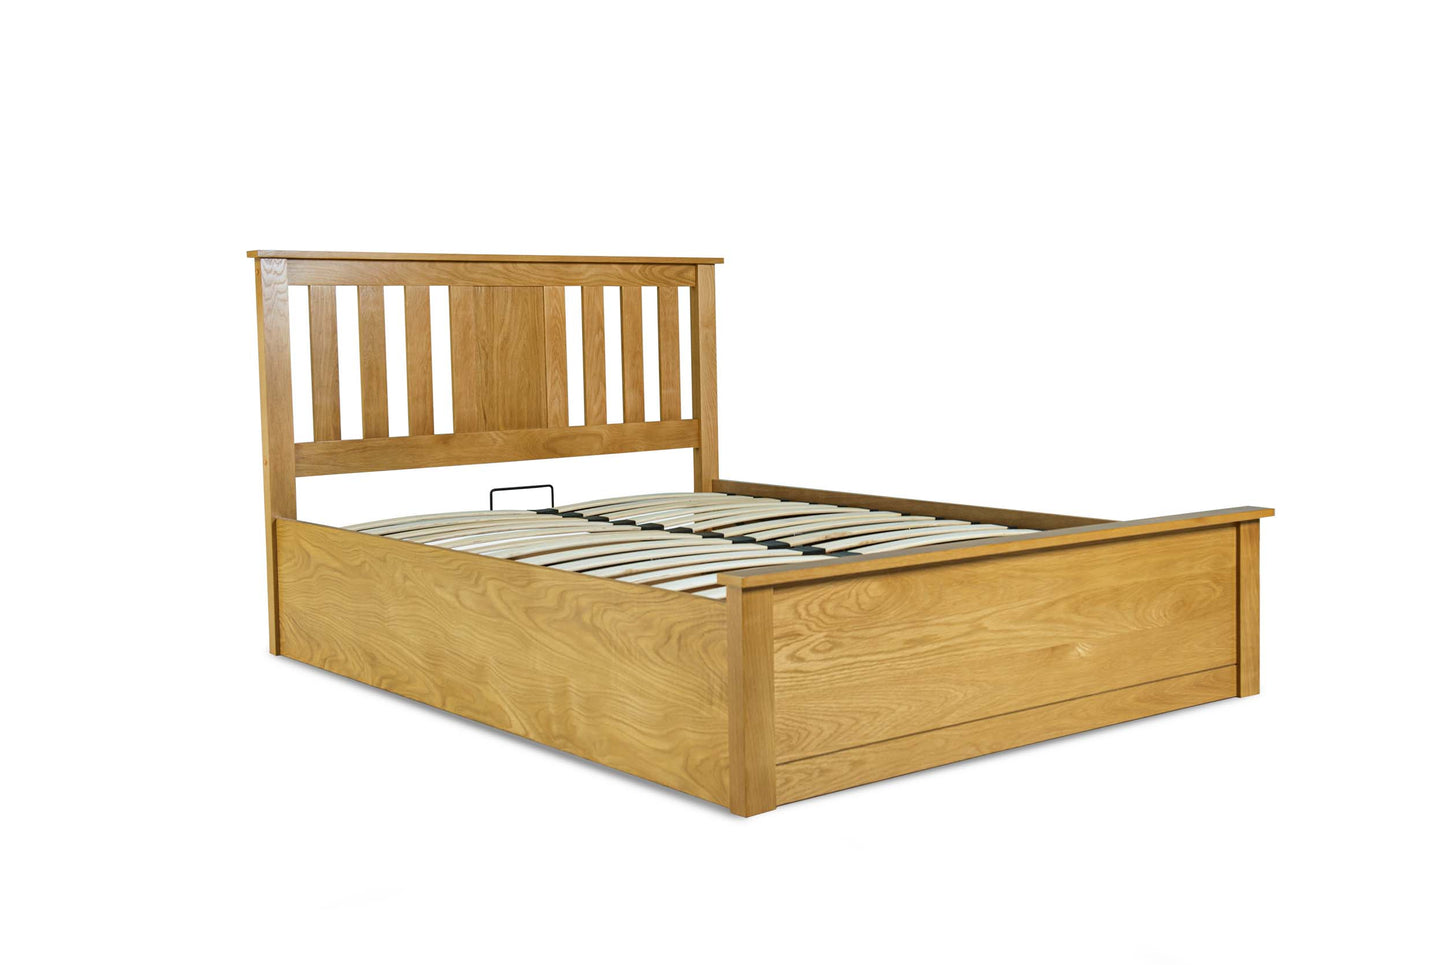 Chesterfield Ottoman Storage Bed Frame - 6ft Super King - Natural Oak